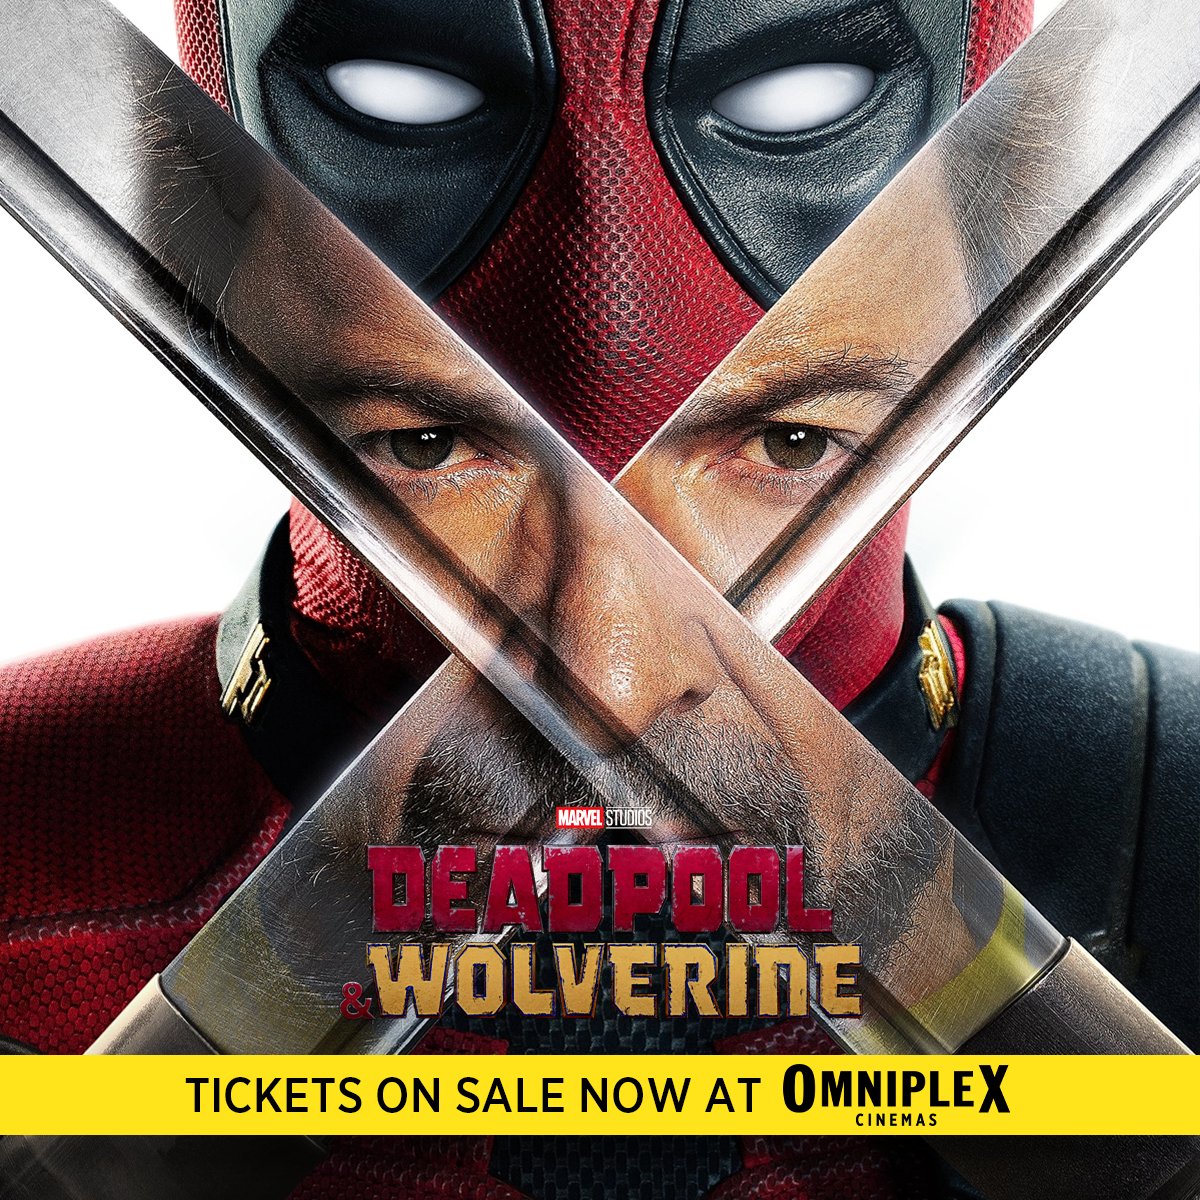 Tickets for Deadpool & Wolverine are on sale now!

#DeadpoolWolverine previews in Omniplex Cinemas, Thursday 25 July.

Book Now: omniplex.ie/whatson/movie/…